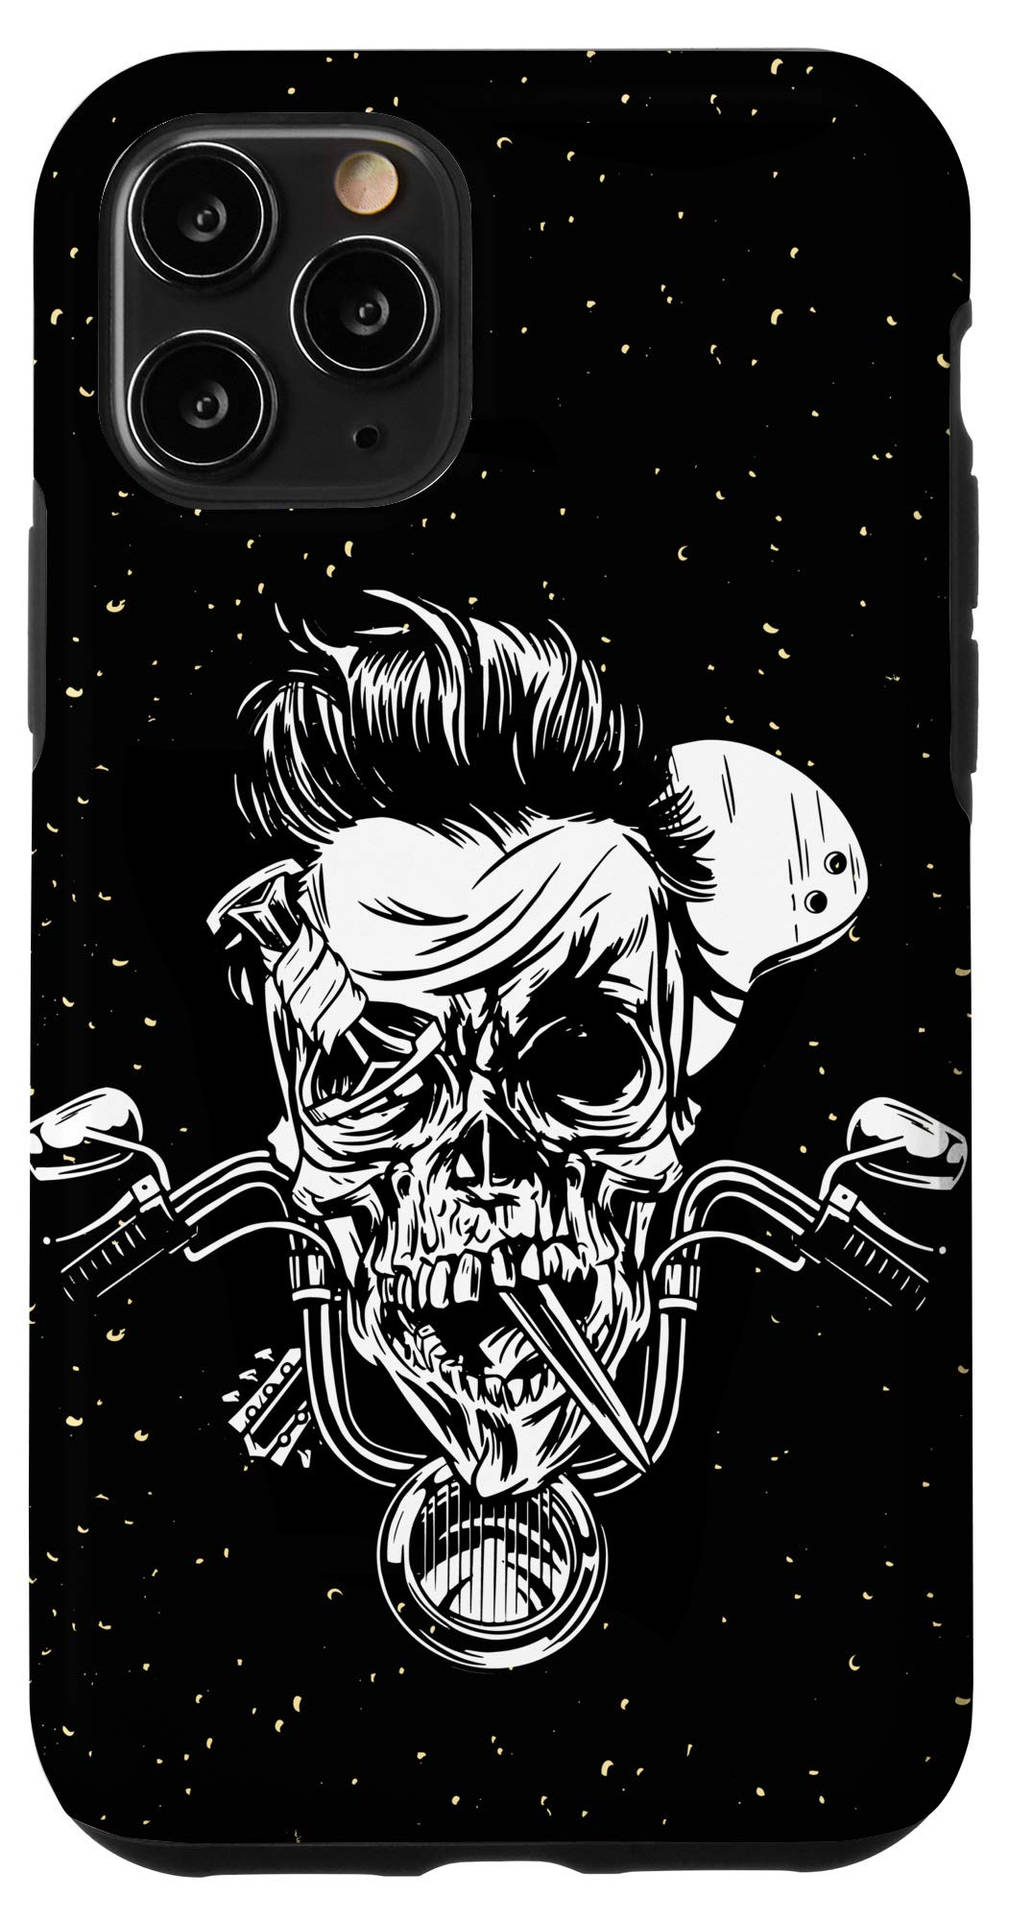 A Black Phone Case With A Skull And A Motorcycle On It Wallpaper